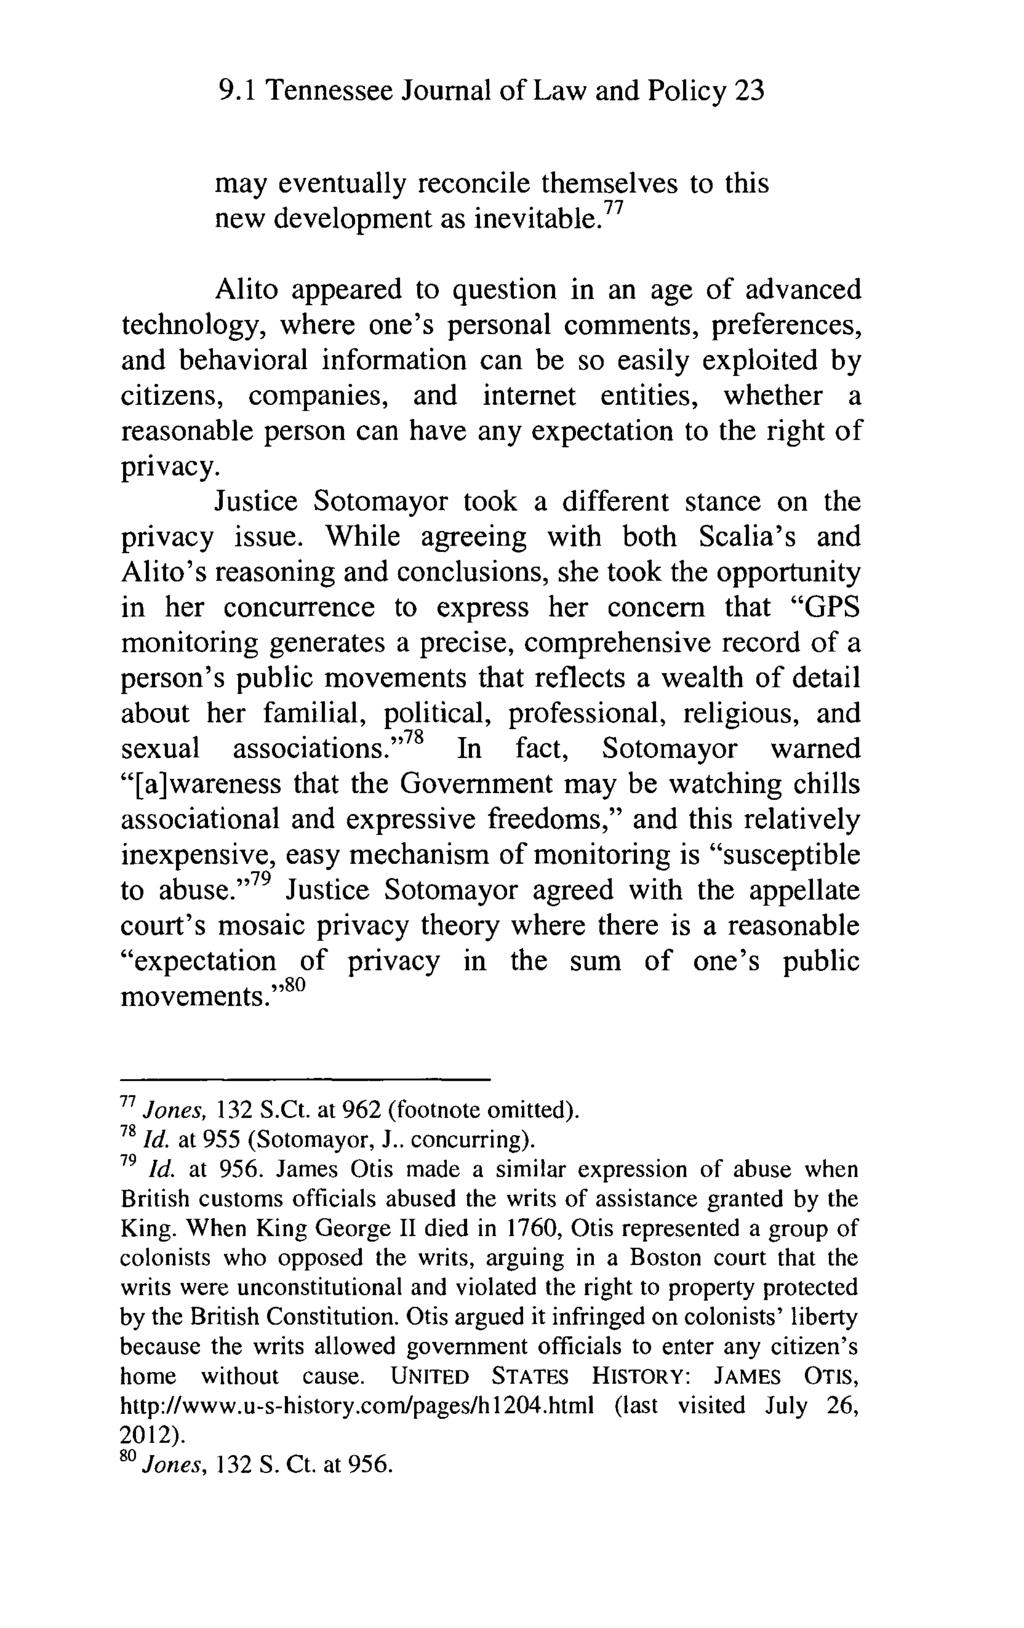 Reid: United States v. Jones: Big Brother and the "Common Good" versus 9.1 Tennessee Journal of Law and Policy 23 may eventually reconcile themselves to this new development as inevitable.